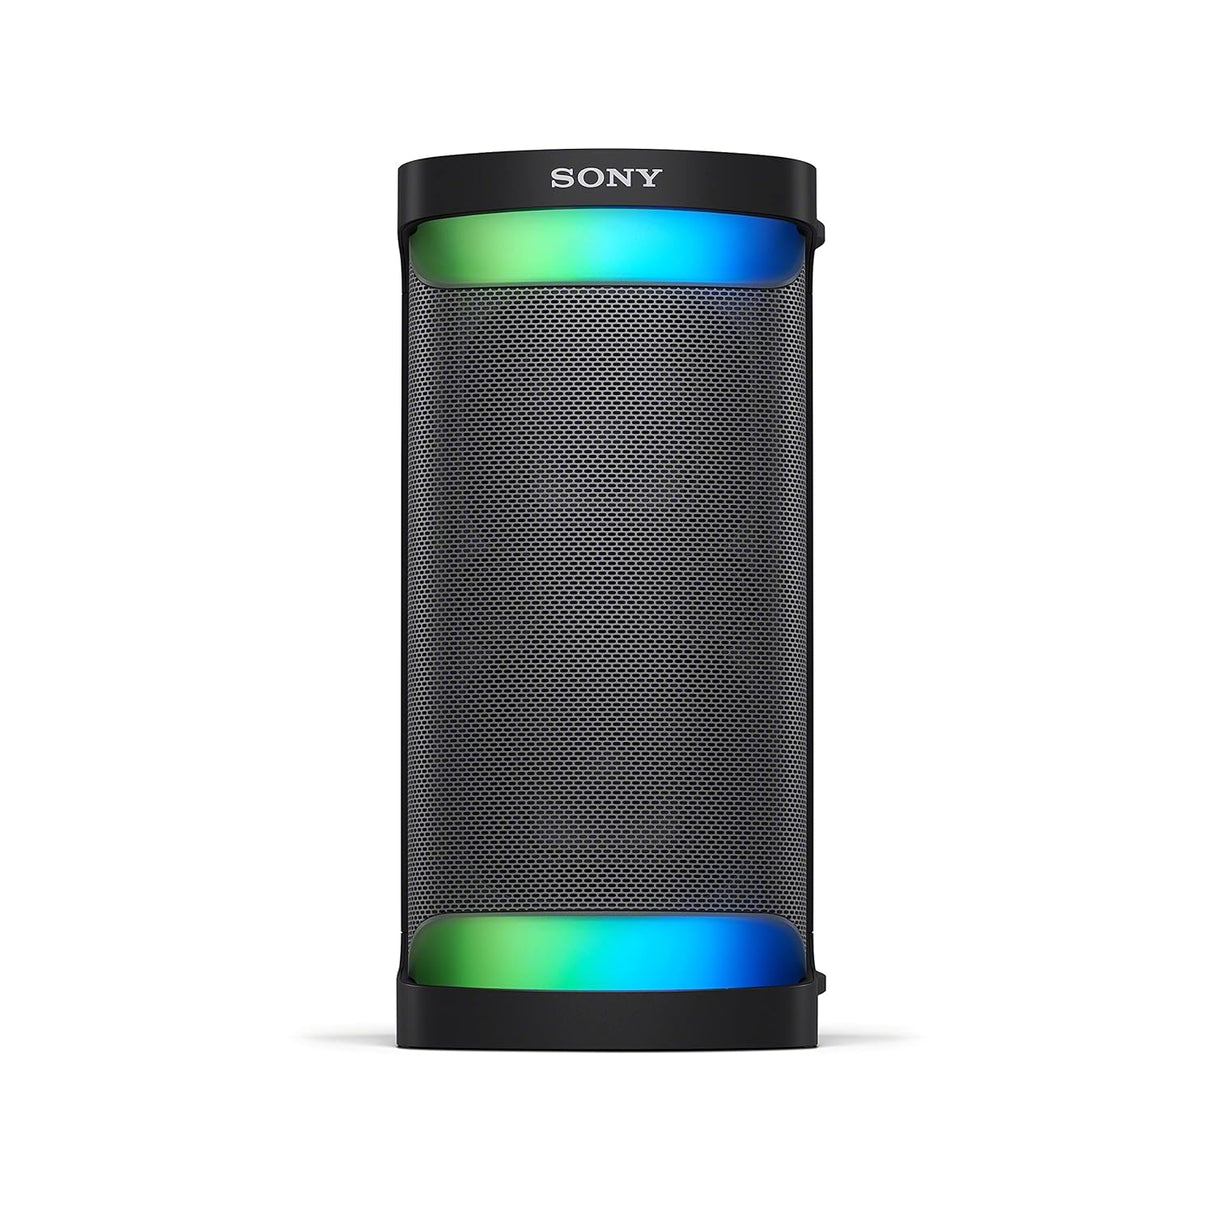 Sony SRS-XP500 Portable Wireless Bluetooth Party Speaker (Karaoke/Guitar Input, IPX4 Splashproof Protection,20hrs Battery,Ambient Light,USB Play & Charge,Quick Charge, Power Bank)